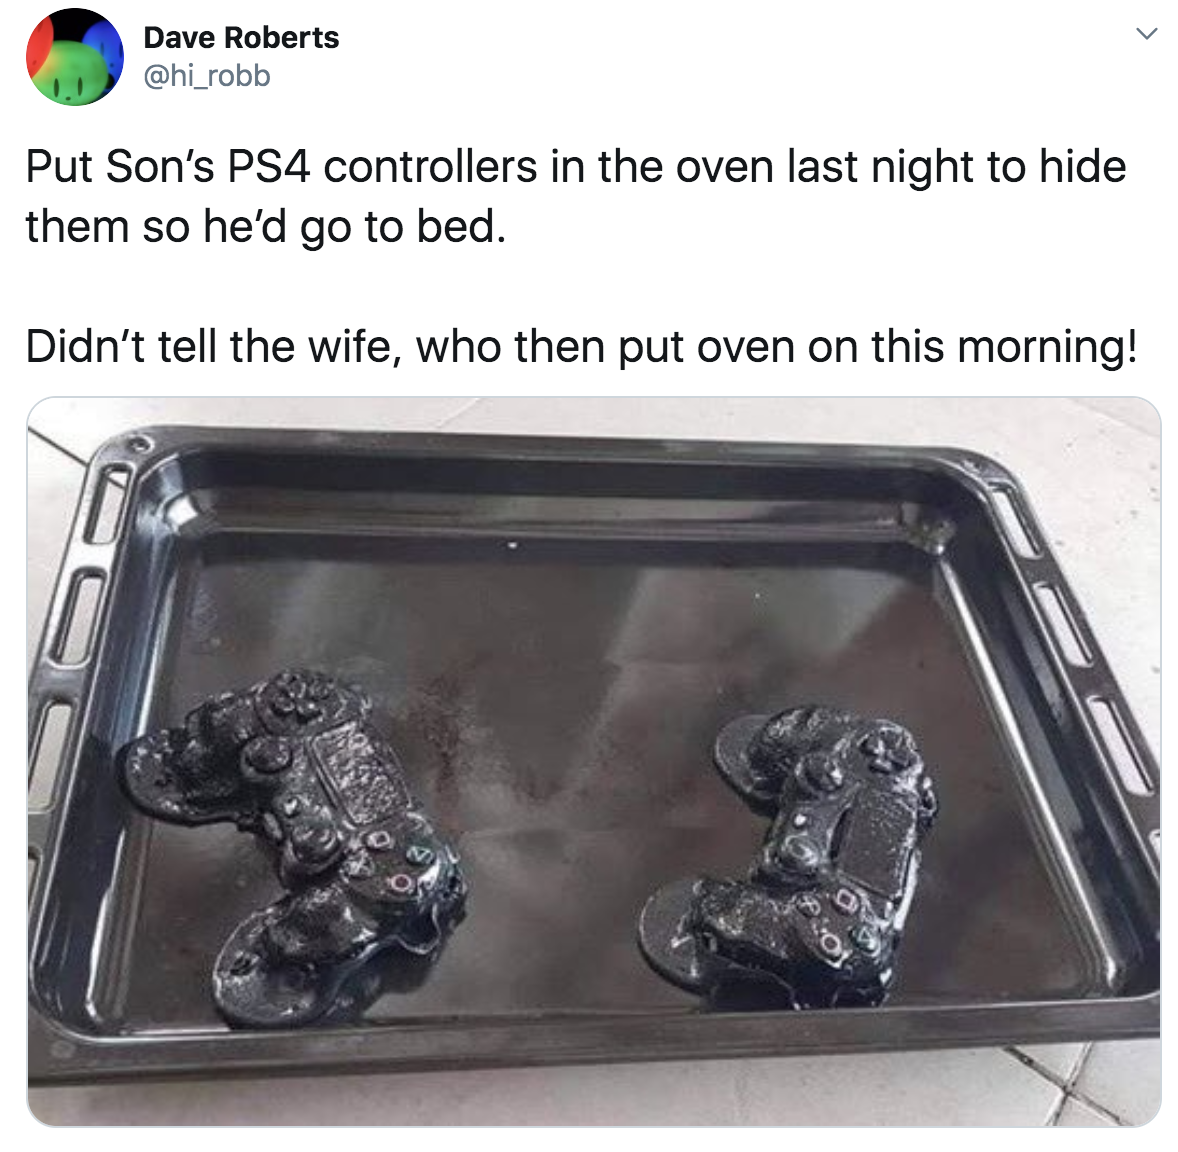 ps4 controllers hidden in an oven were accidentally left there and melted